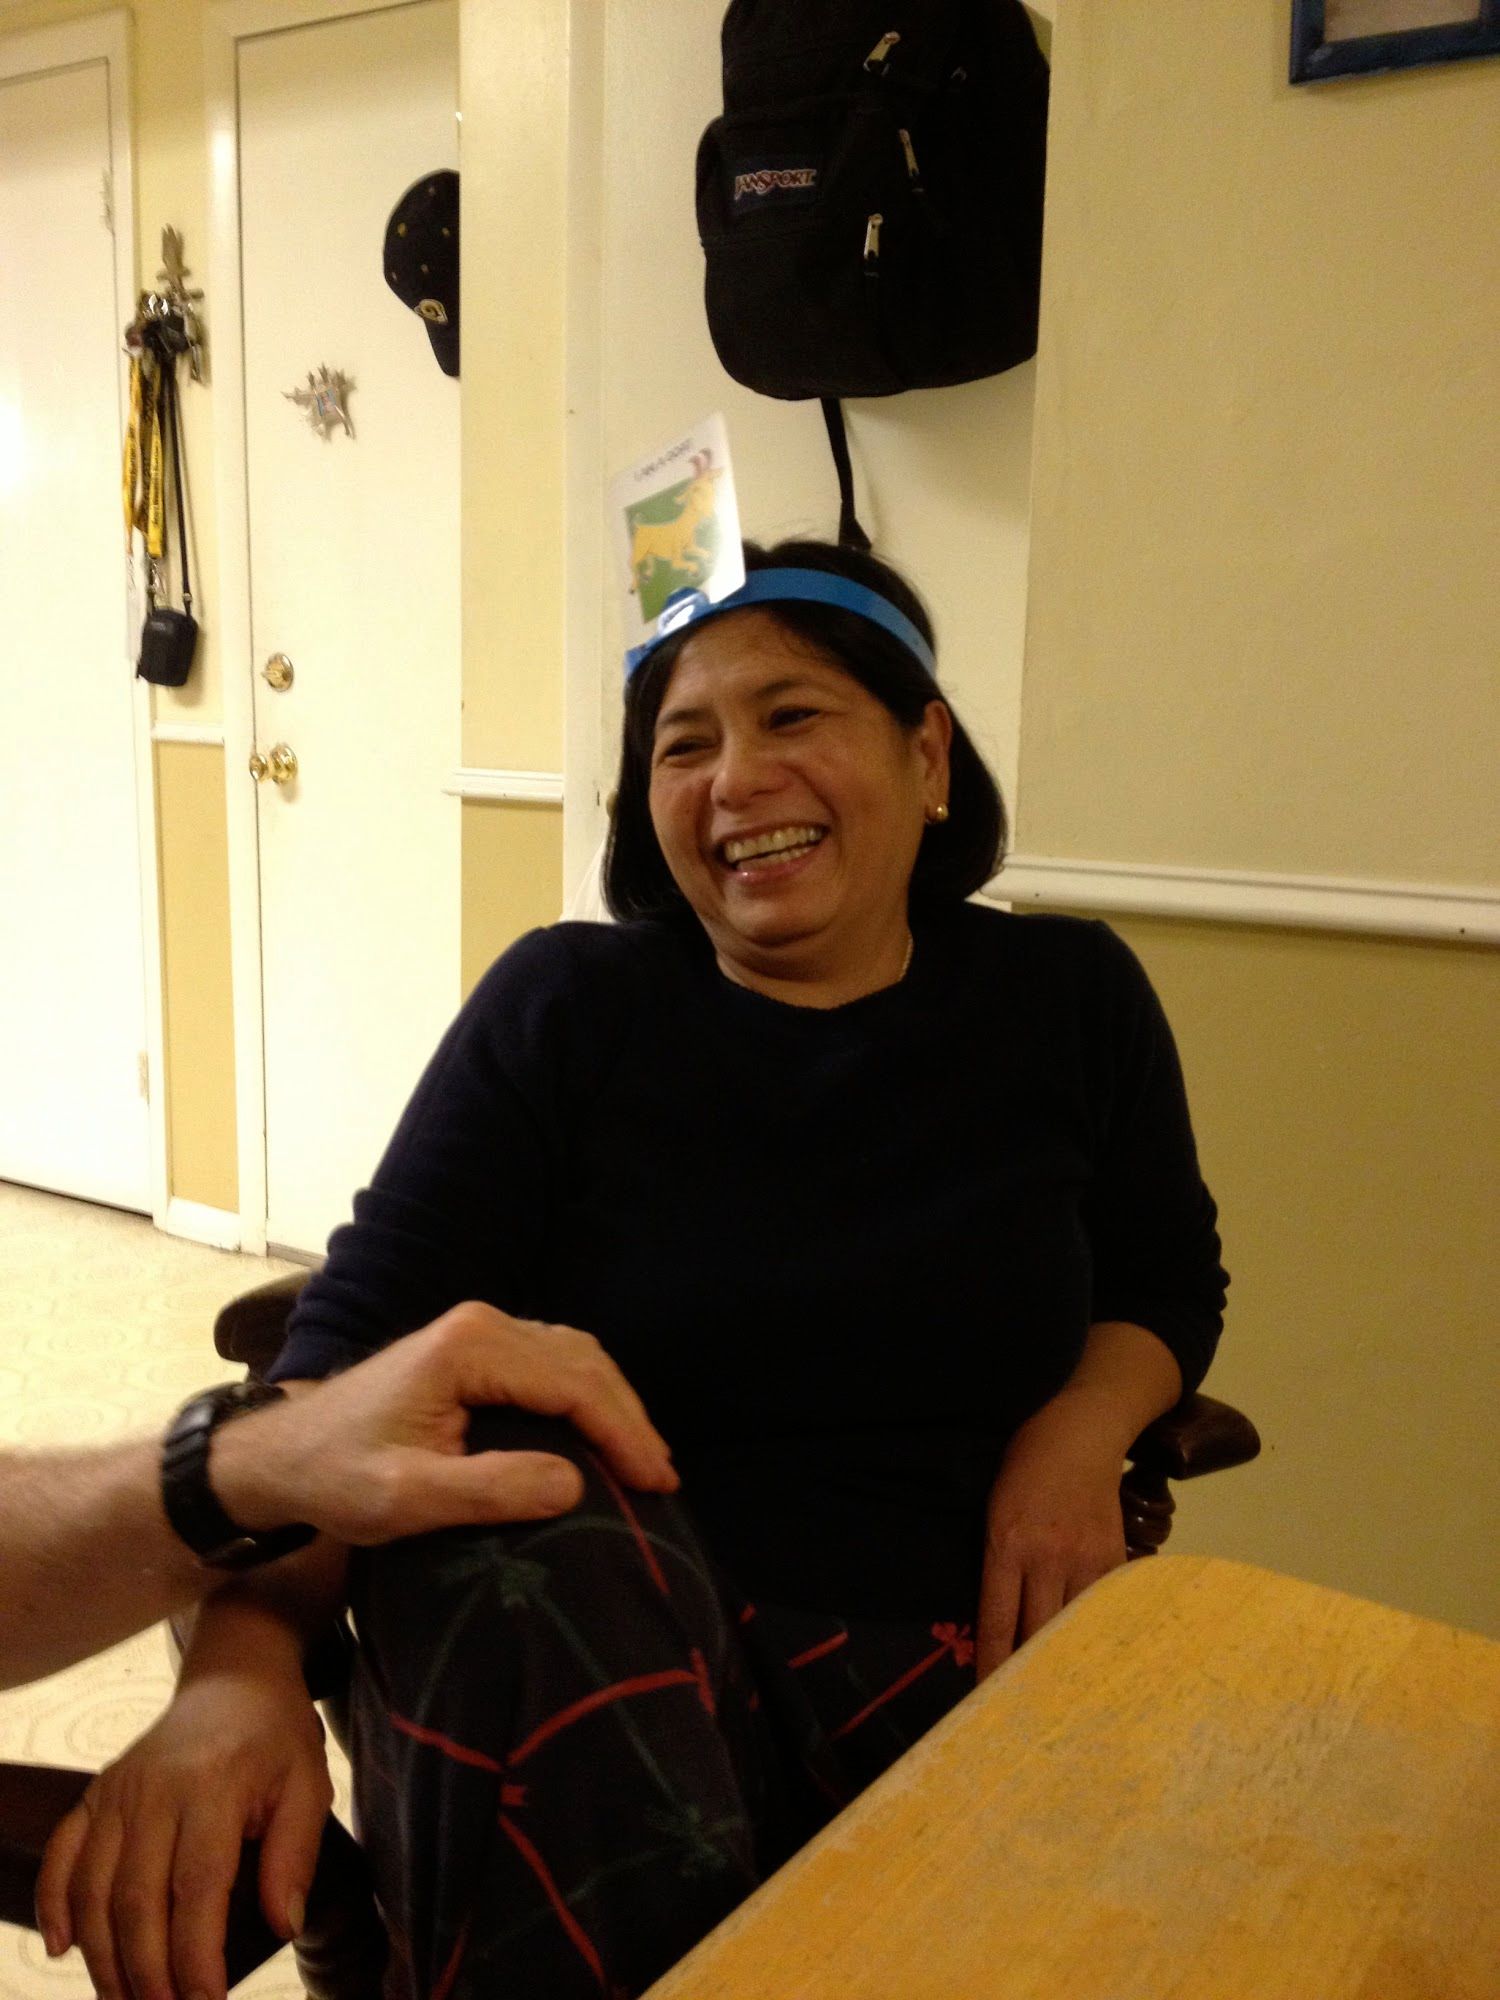  My Mom playing Headbanz.I love this picture of her because she is clearly laughing and having a good time 